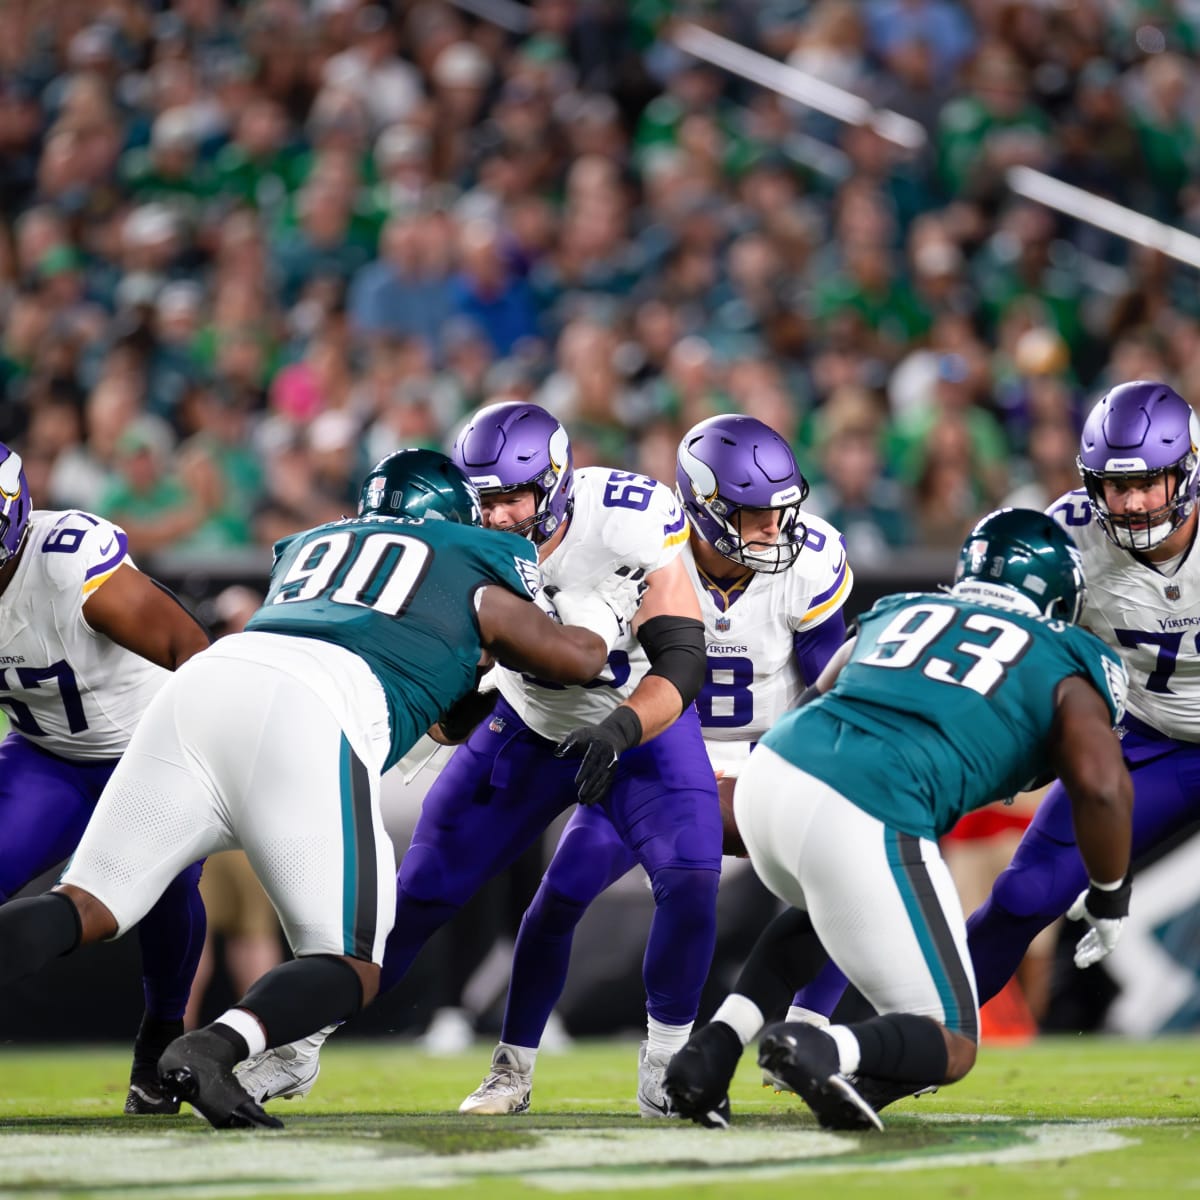 Numbers suggest the Vikings' O-line could be good with Dalton